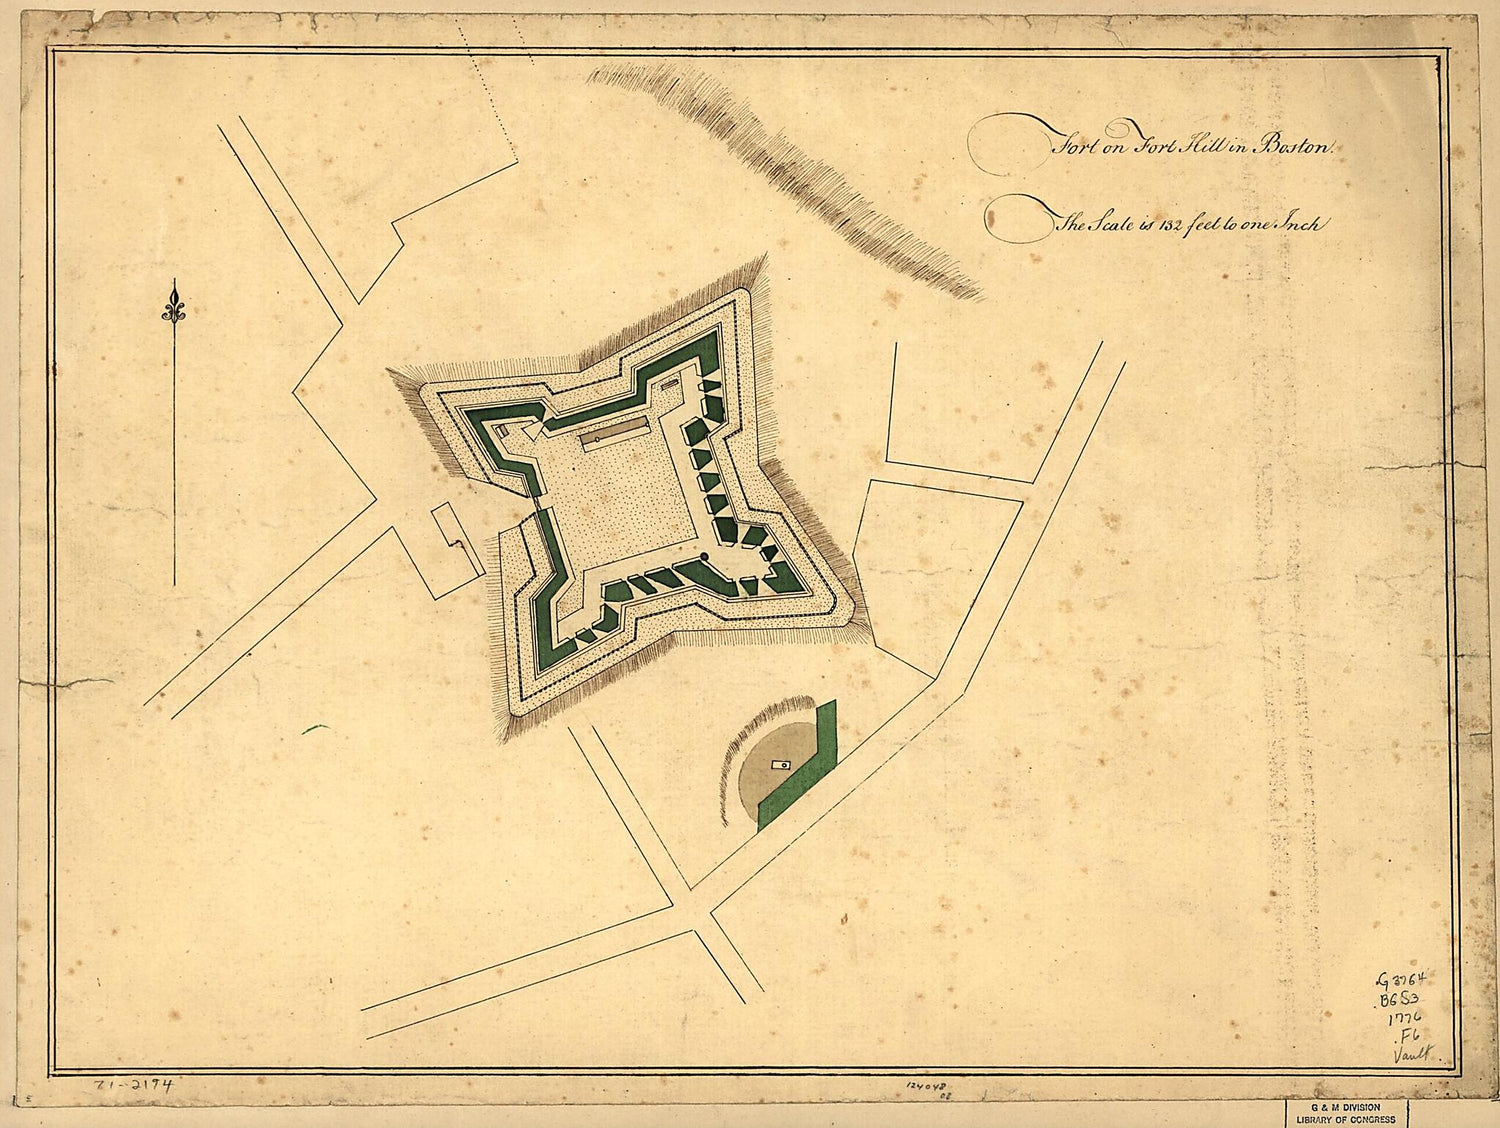 This old map of Fort On Fort Hill In Boston from 1776 was created by  in 1776